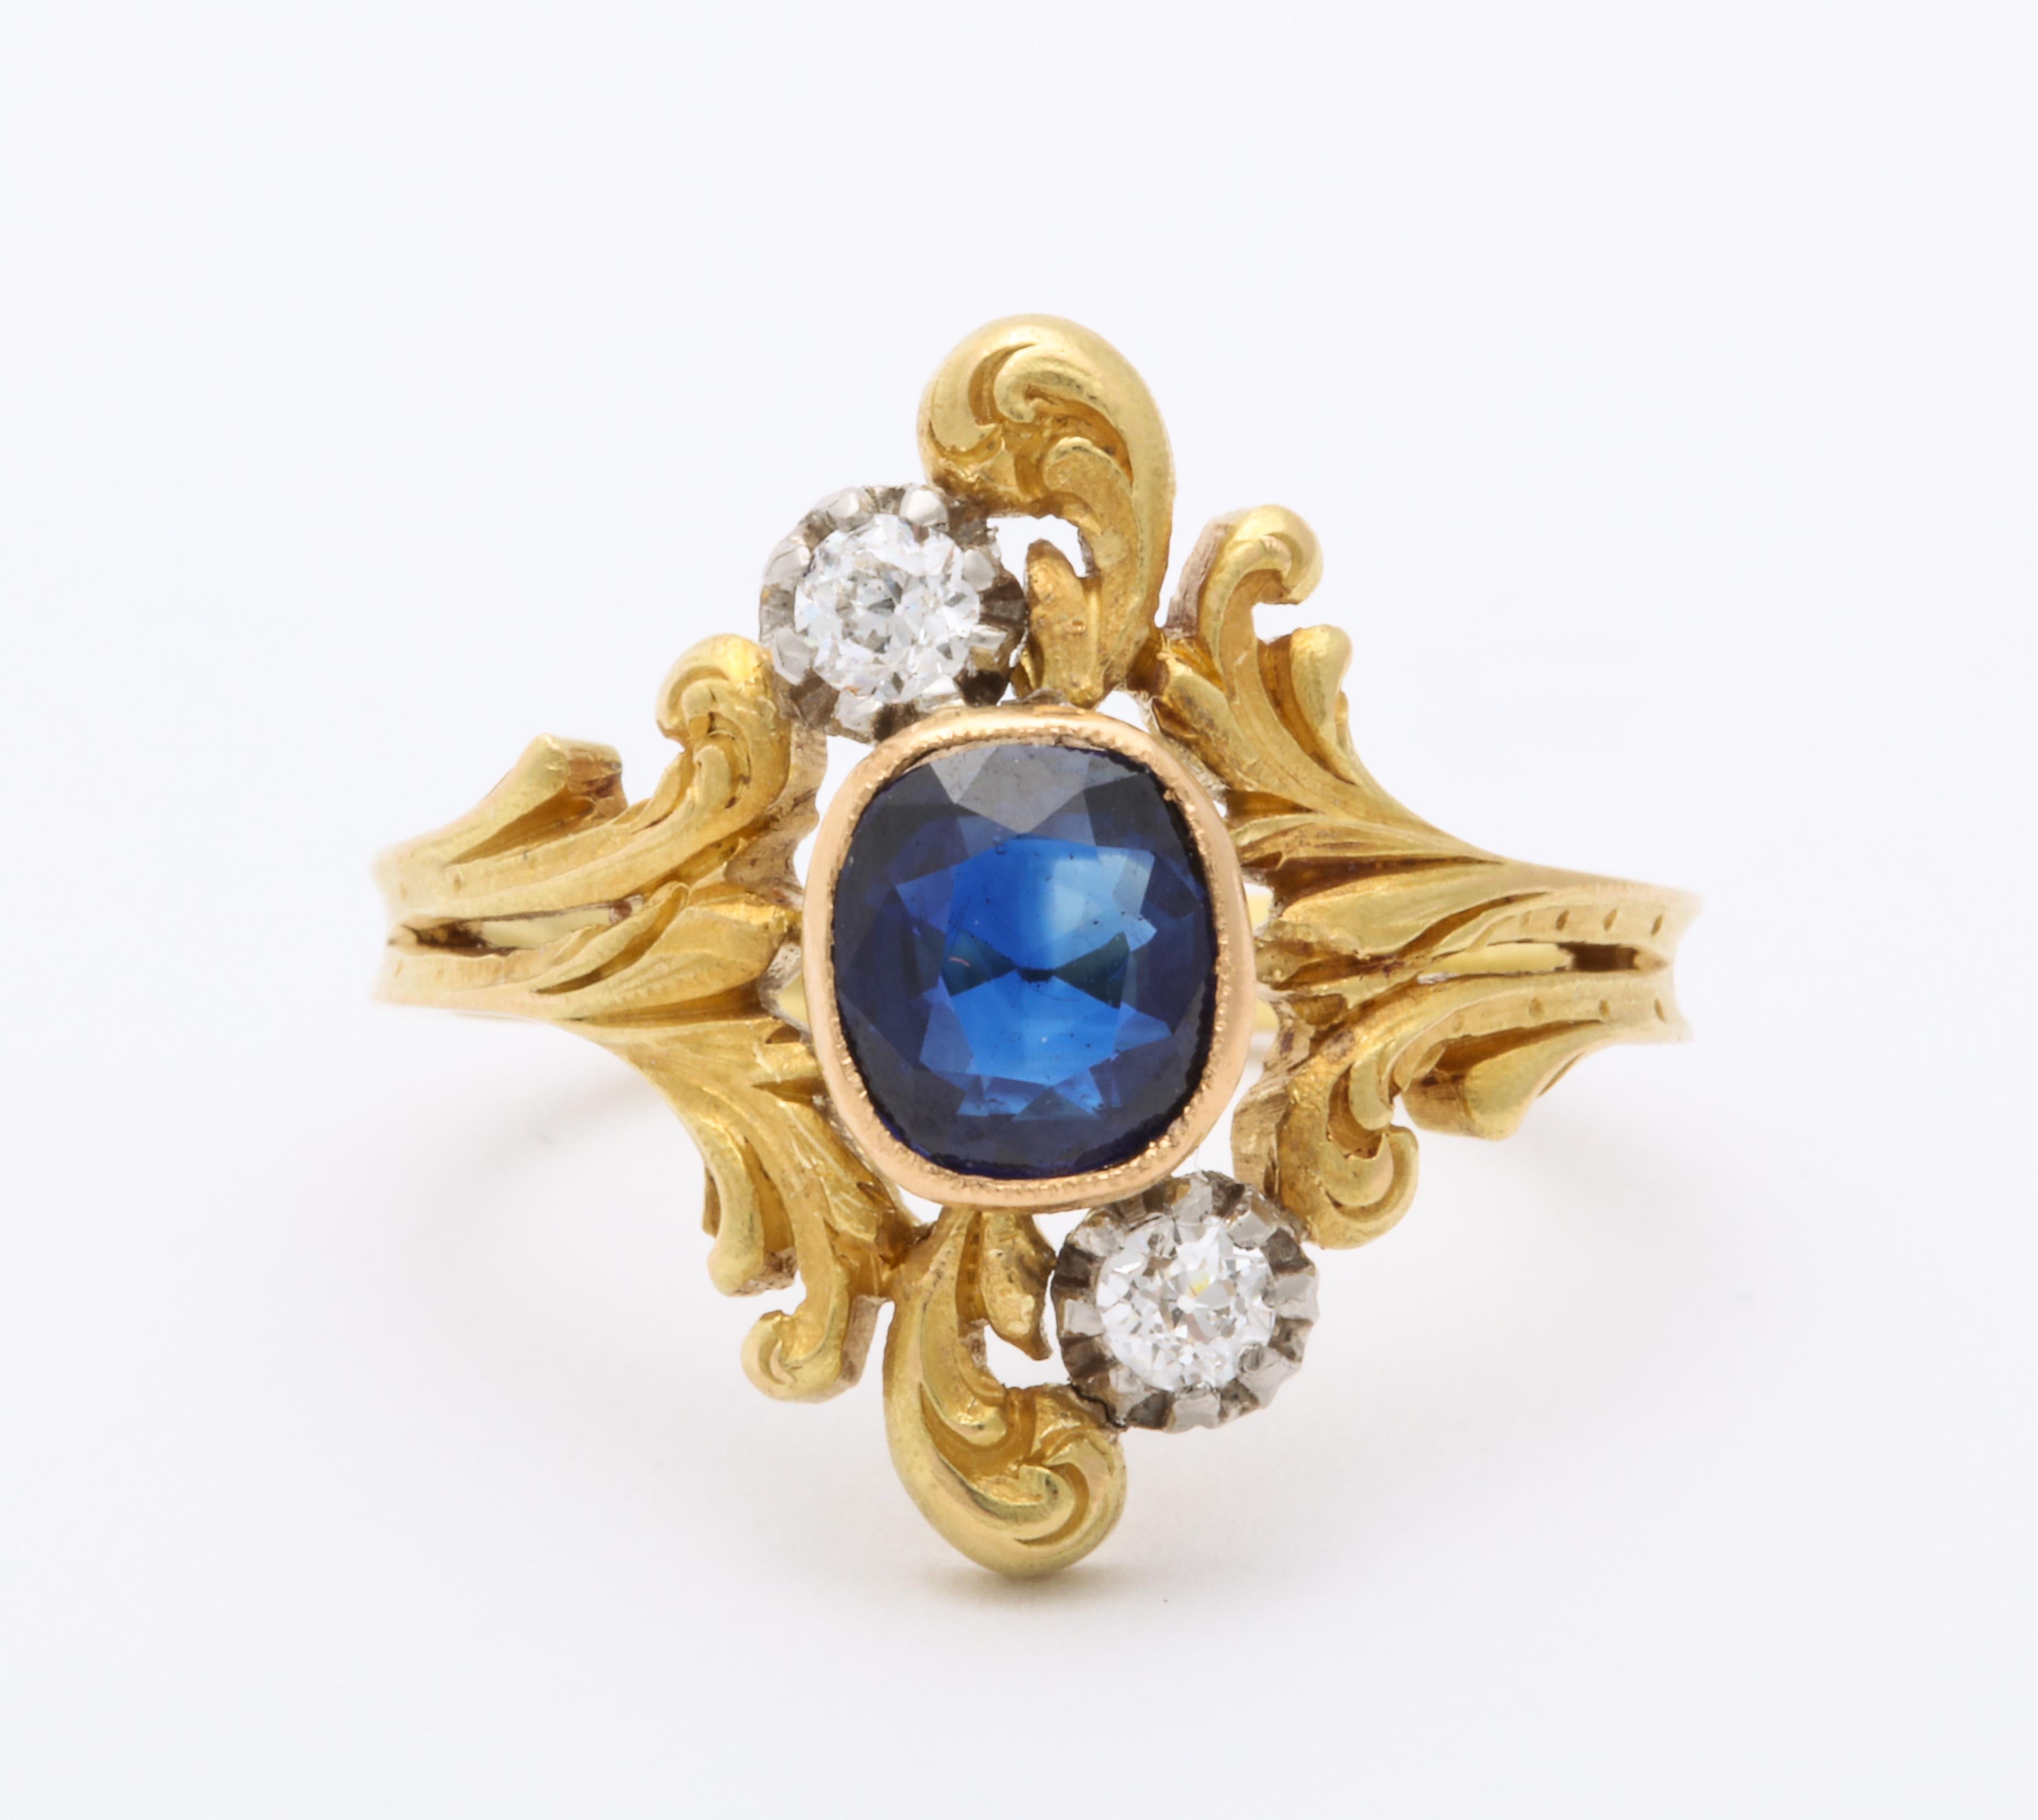 All elegance and fineness, the curves if the Art Nouveau period sparkle on this 18 kt gold ring with two european cut diamonds counterposed against a natural ceylon sapphire, like the stars in the starry night. The shank is a continuation of these